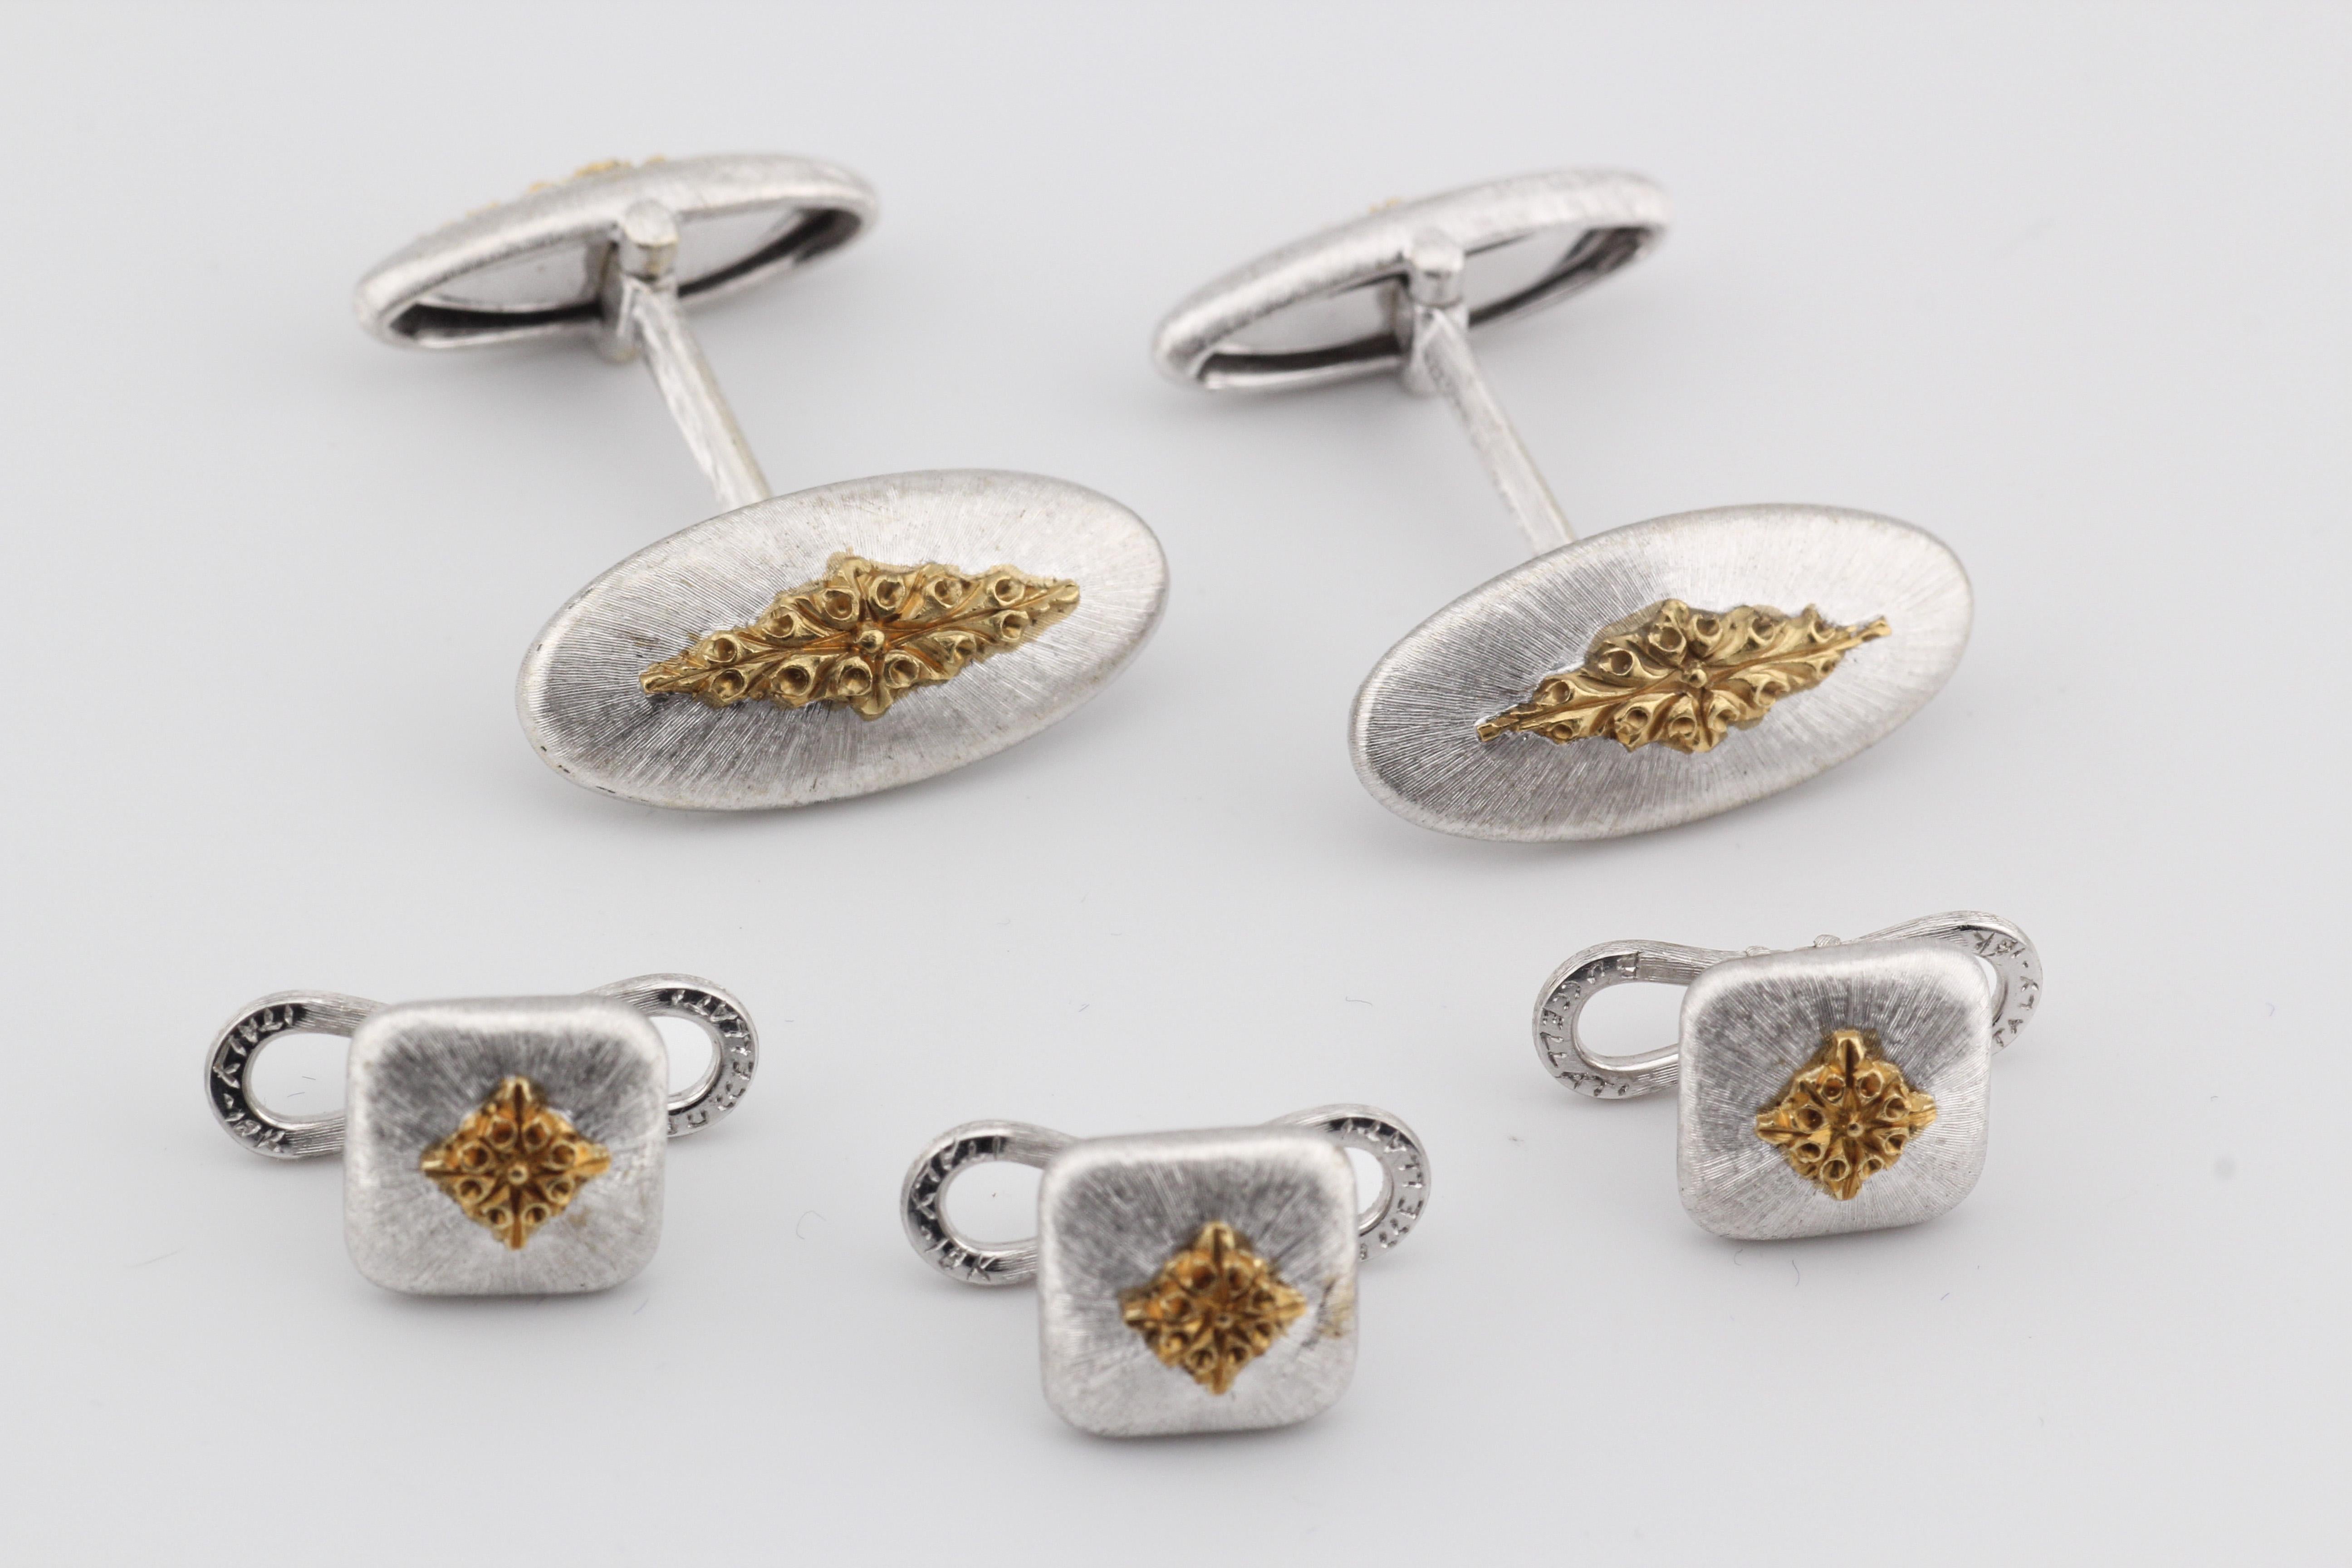 Introducing a fusion of opulence and sophistication, the Buccellati 18K White Gold Cufflinks and 3 Studs Set adorned with 18K Yellow Gold Inlay Design redefine luxury in men's accessories. Crafted with the utmost precision and artistry by the